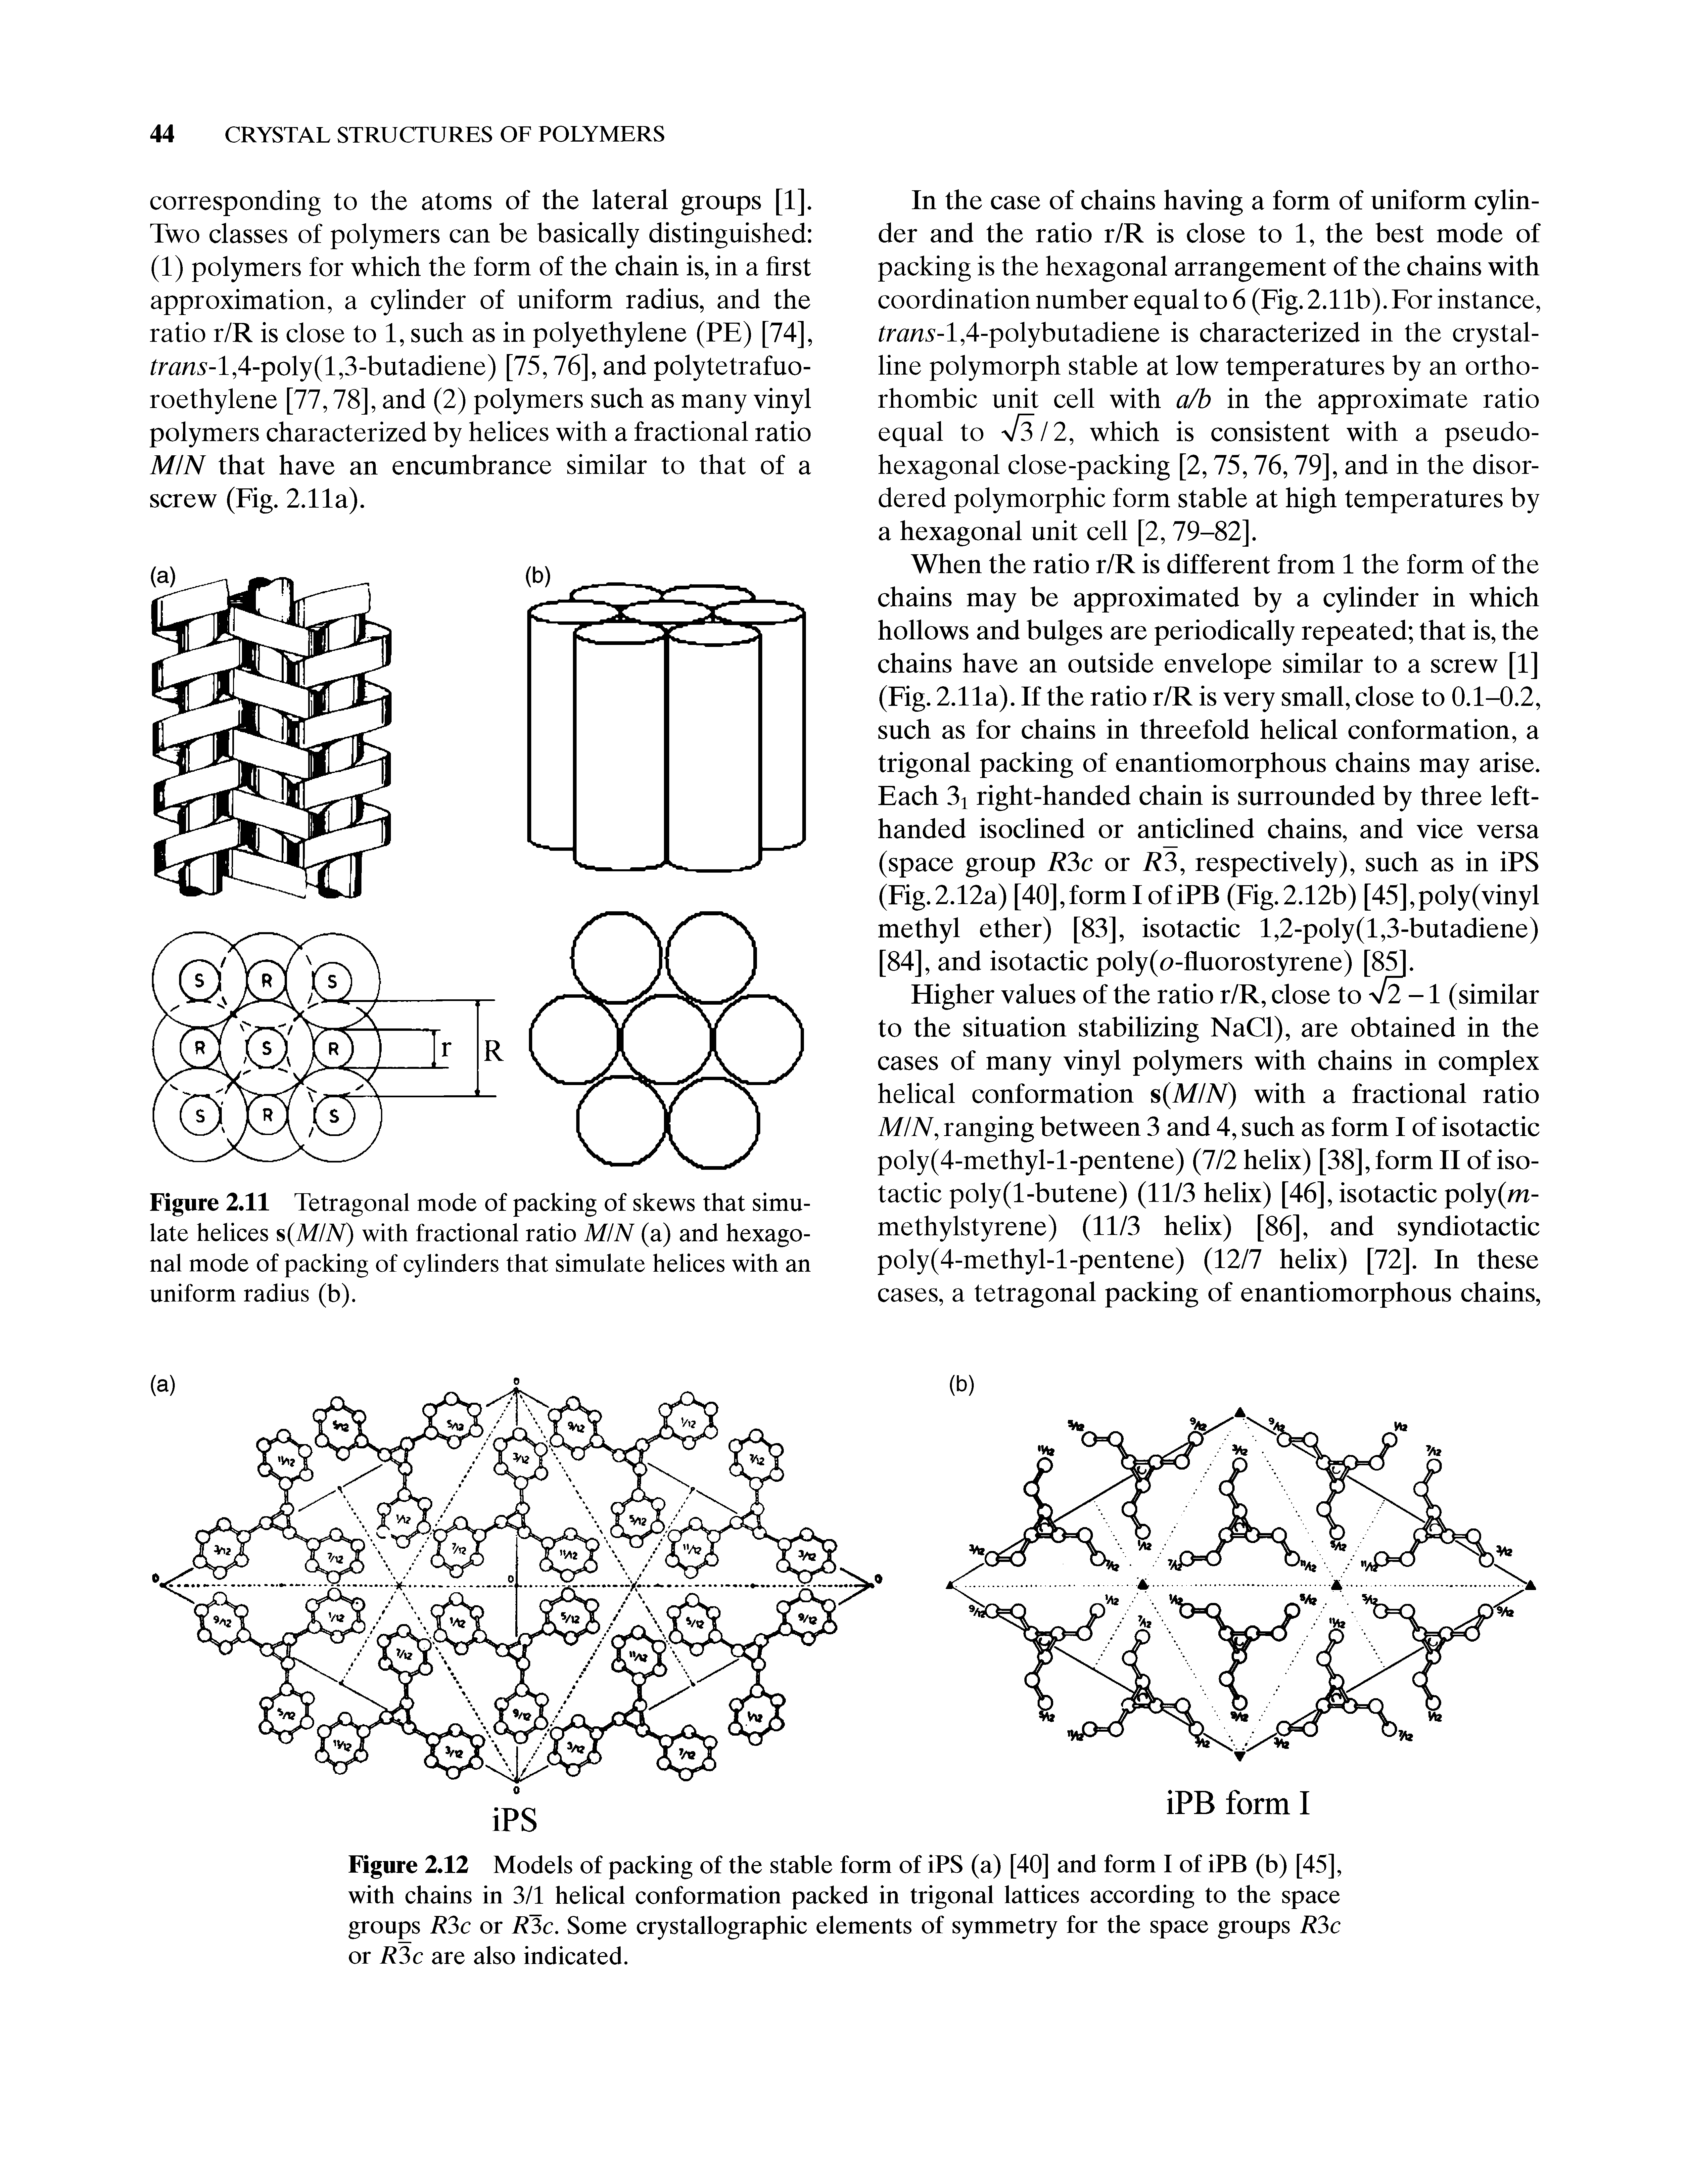 Figure 2.12 Models of packing of the stable form of iPS (a) [40] and form I of iPB (b) [45], with chains in 3/1 helical conformation packed in trigonal lattices according to the space groups R3c or R3c. Some crystallographic elements of symmetry for the space groups R3c or 7 3c are also indicated.